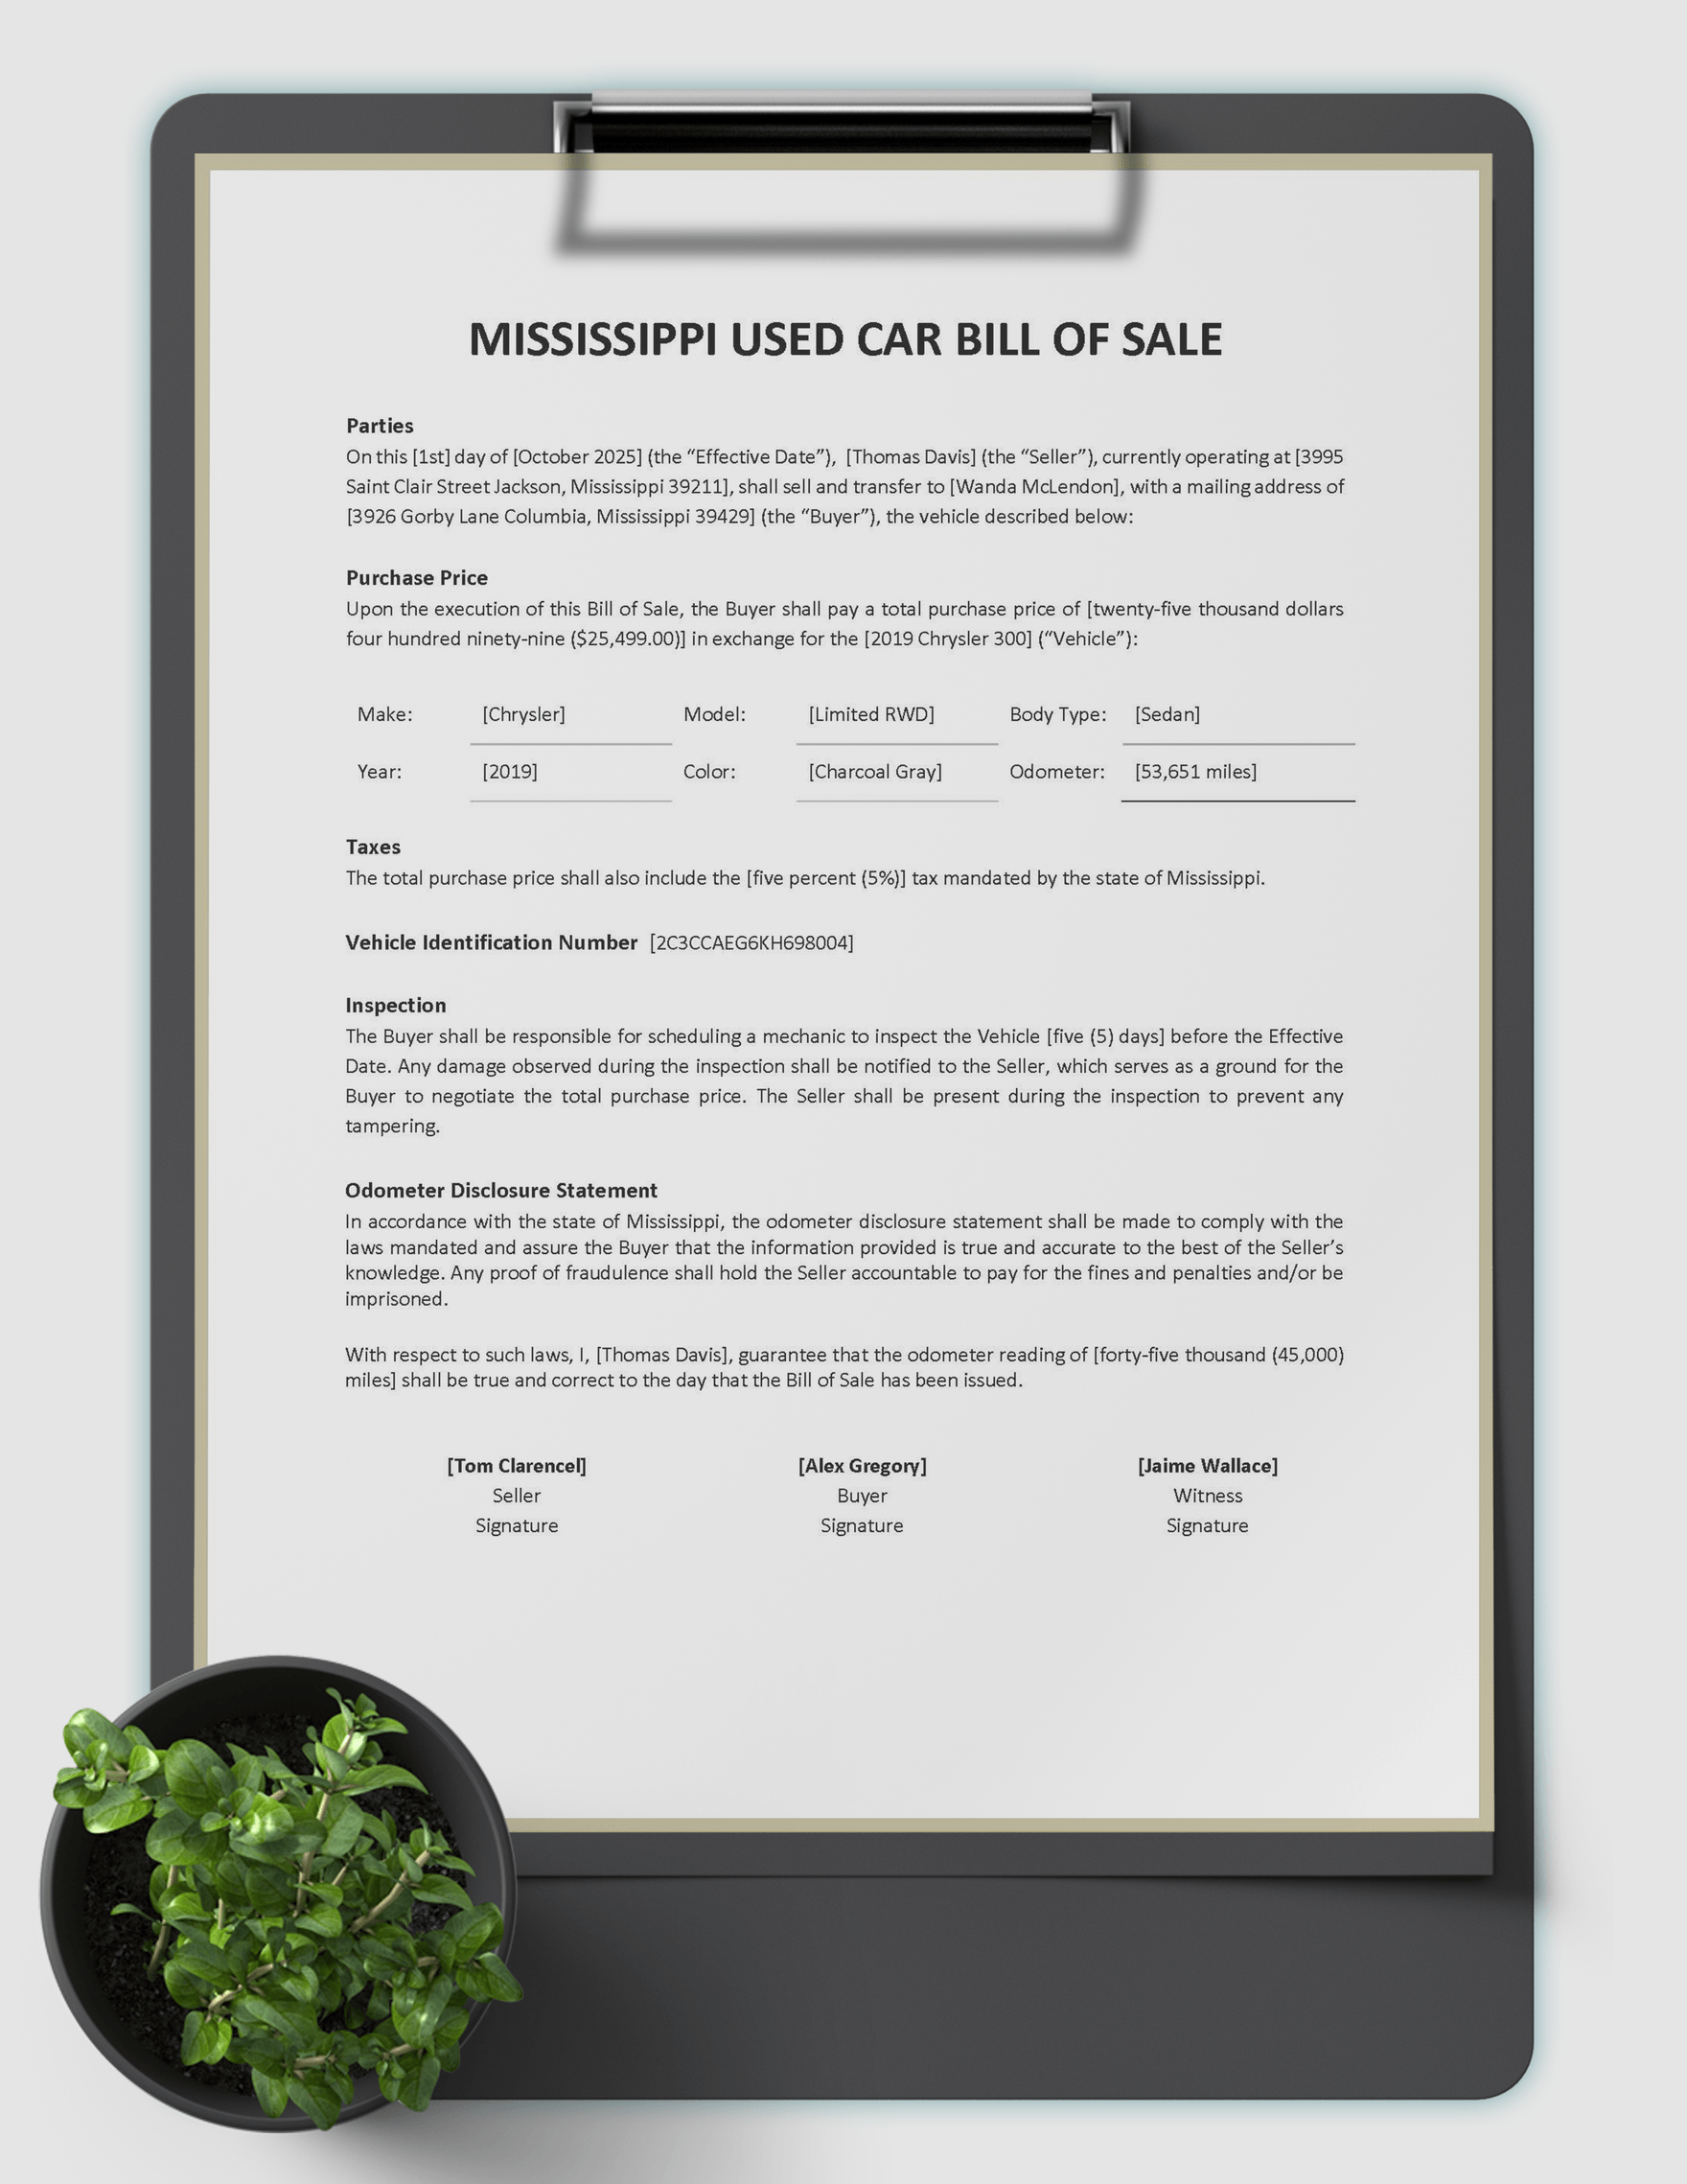 Mississippi Used Car Bill of Sale Form Template